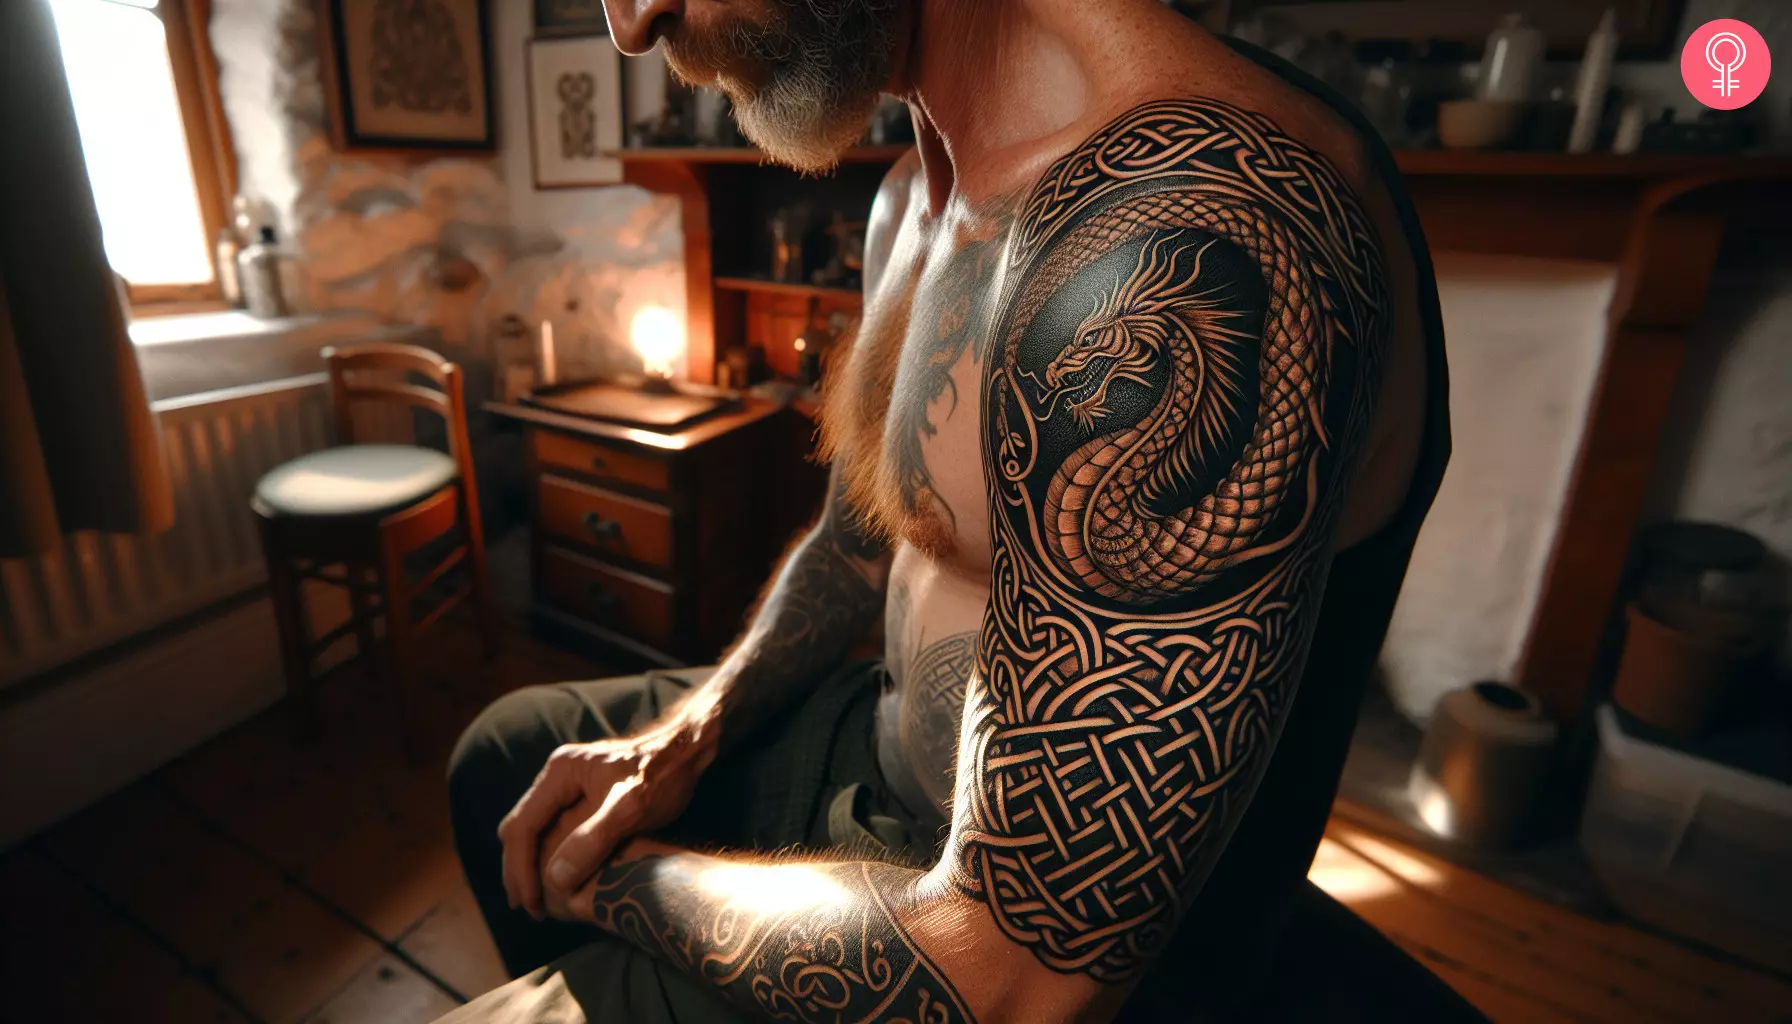 A Celtic dragon tattoo on the upper arm of a man